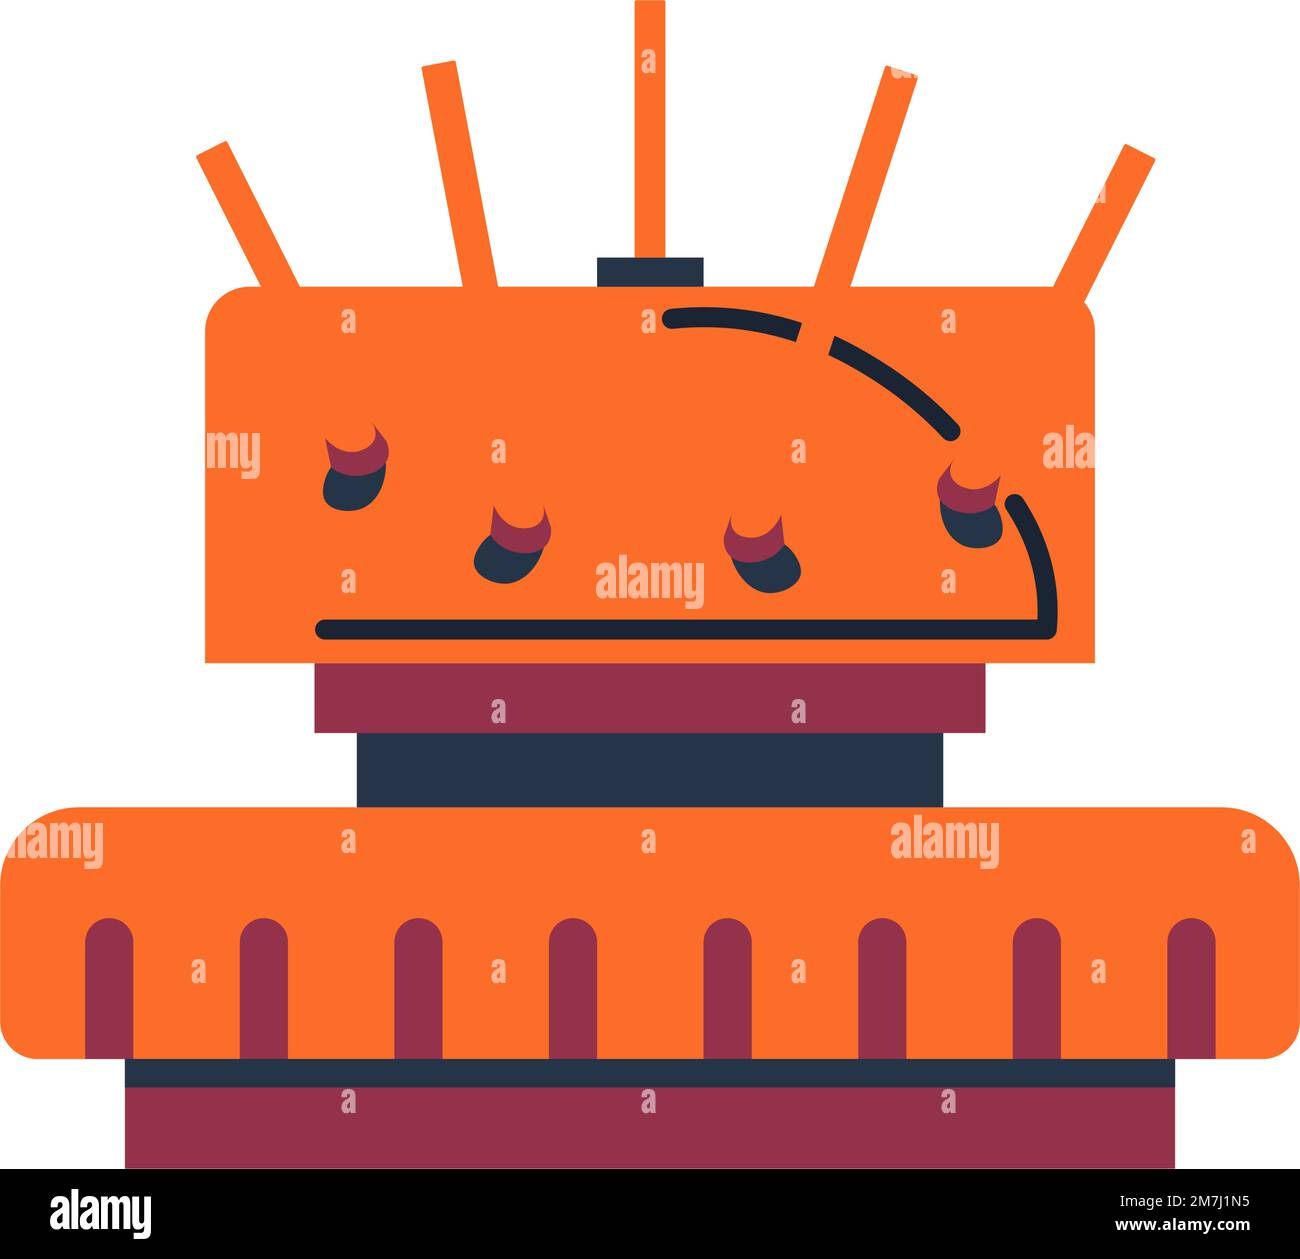 Bomb explosive weapons, land mine against people Stock Vector